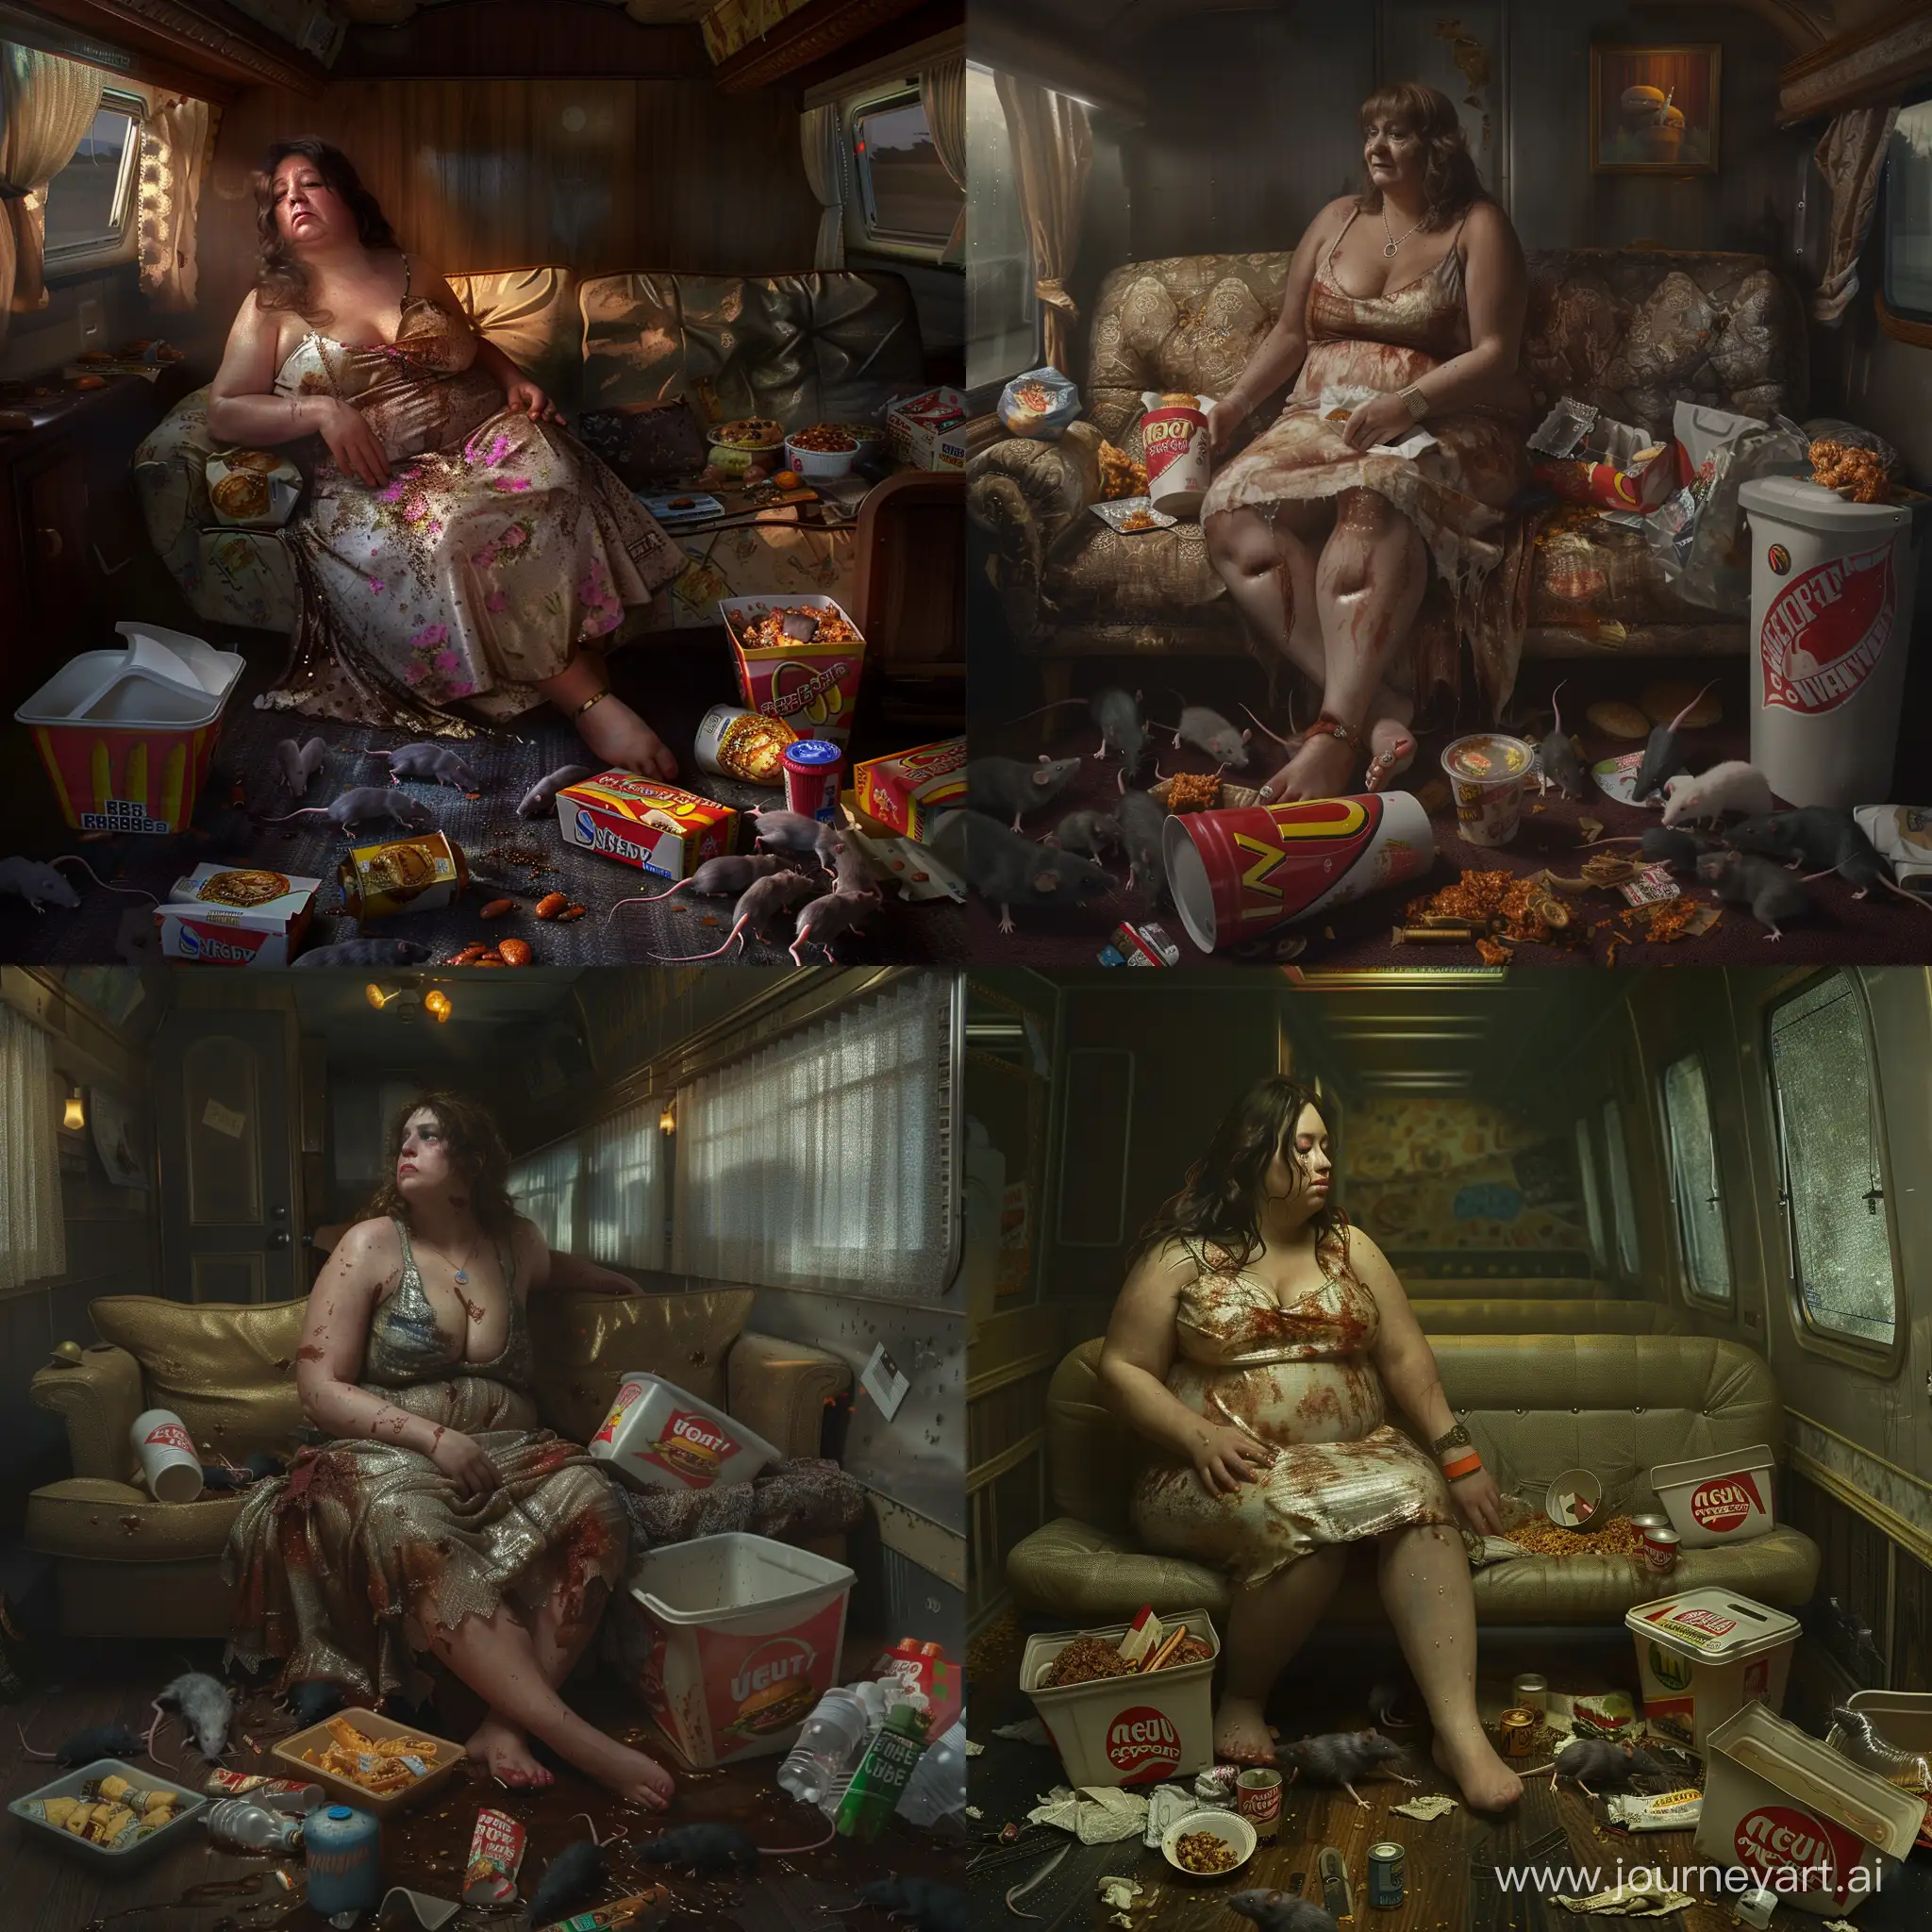 photo-realistc, a fat  woman sits on a couch in a filthy trailer in a stained  dress, empty fast food containers and trash are on the floor as rats crawl amongst the garbage on the floor,atmospheric lighting 